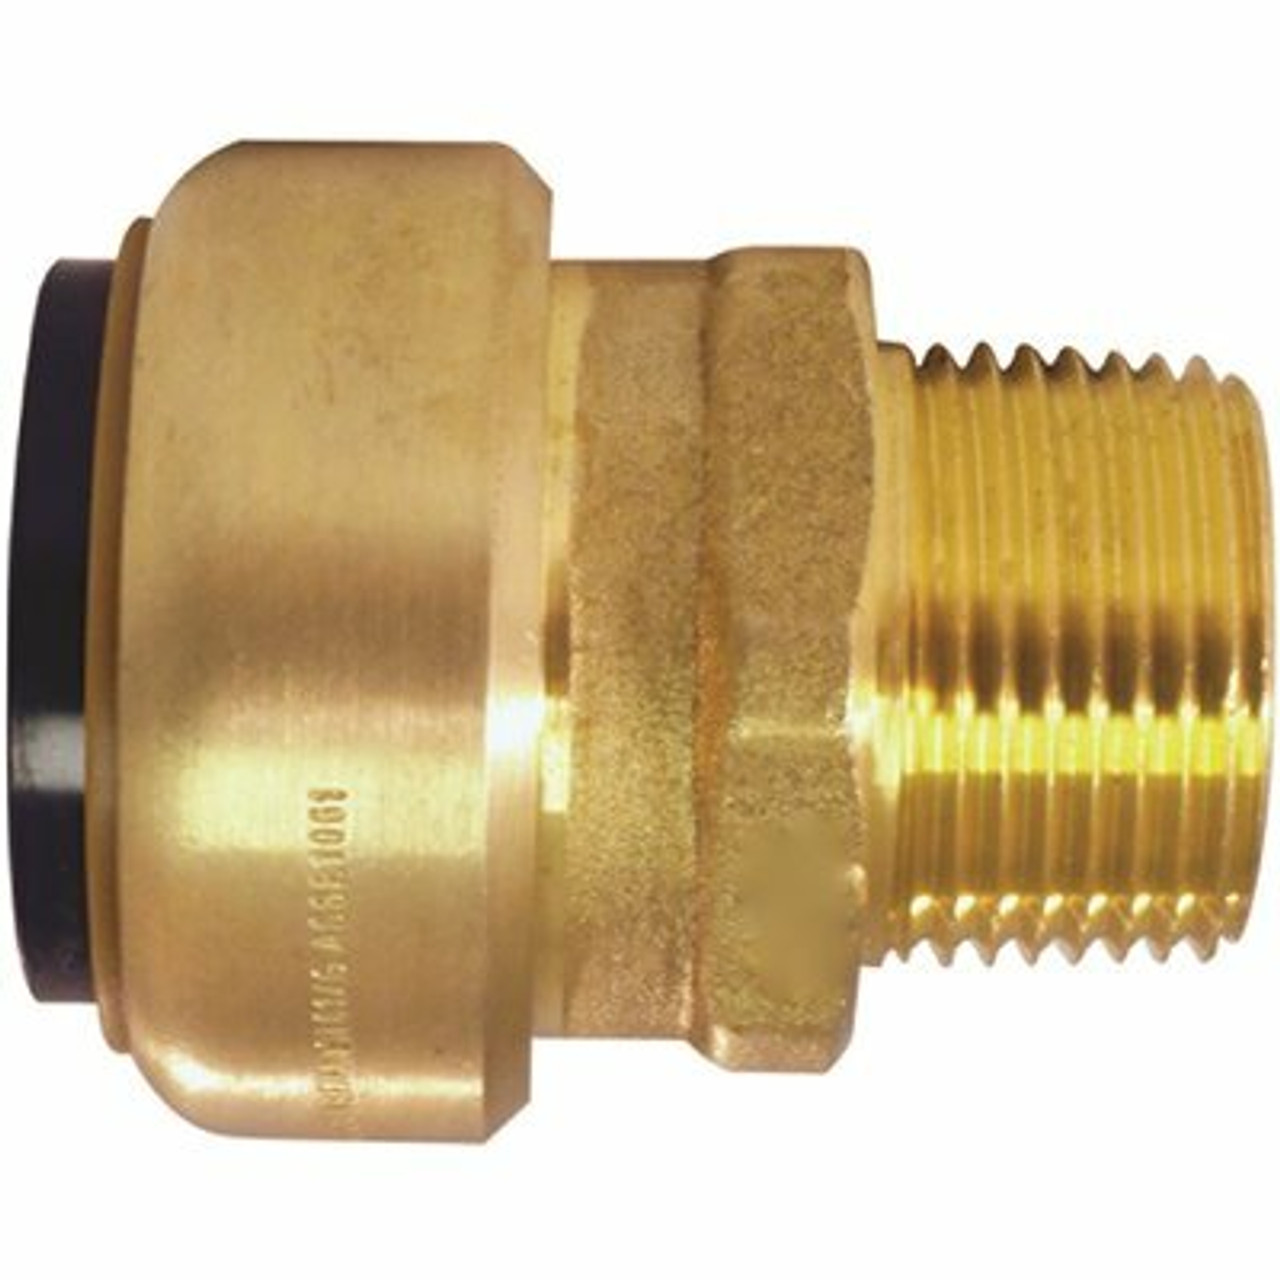 Tectite 1 In. Brass Push-To-Connect X 3/4 In. Male Pipe Thread Reducing Adapter